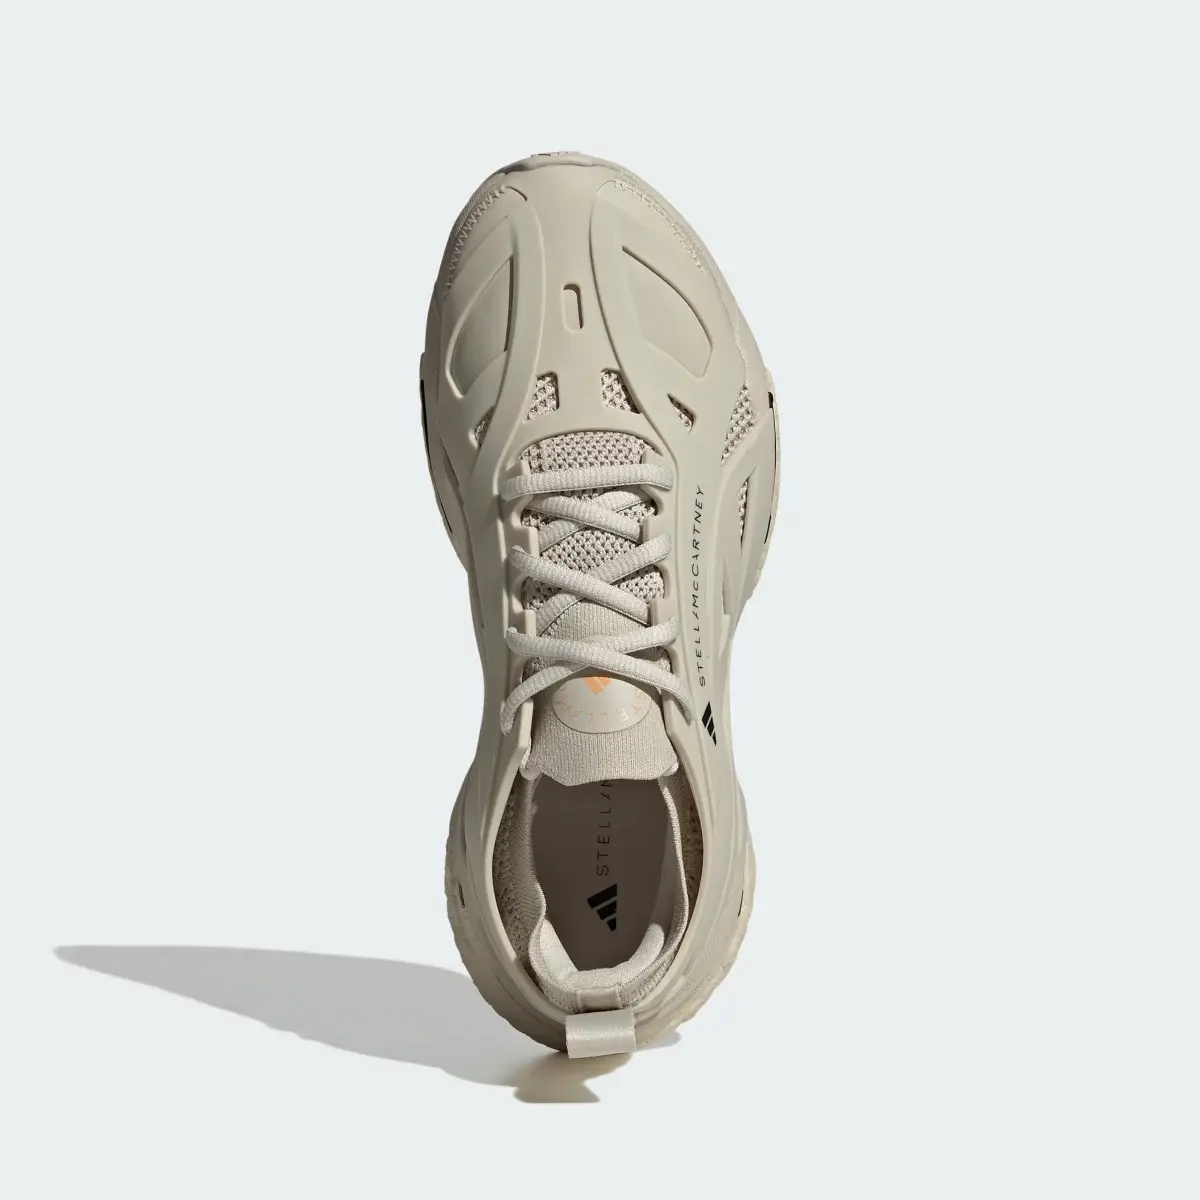 Adidas by Stella McCartney Solarglide Shoes. 3